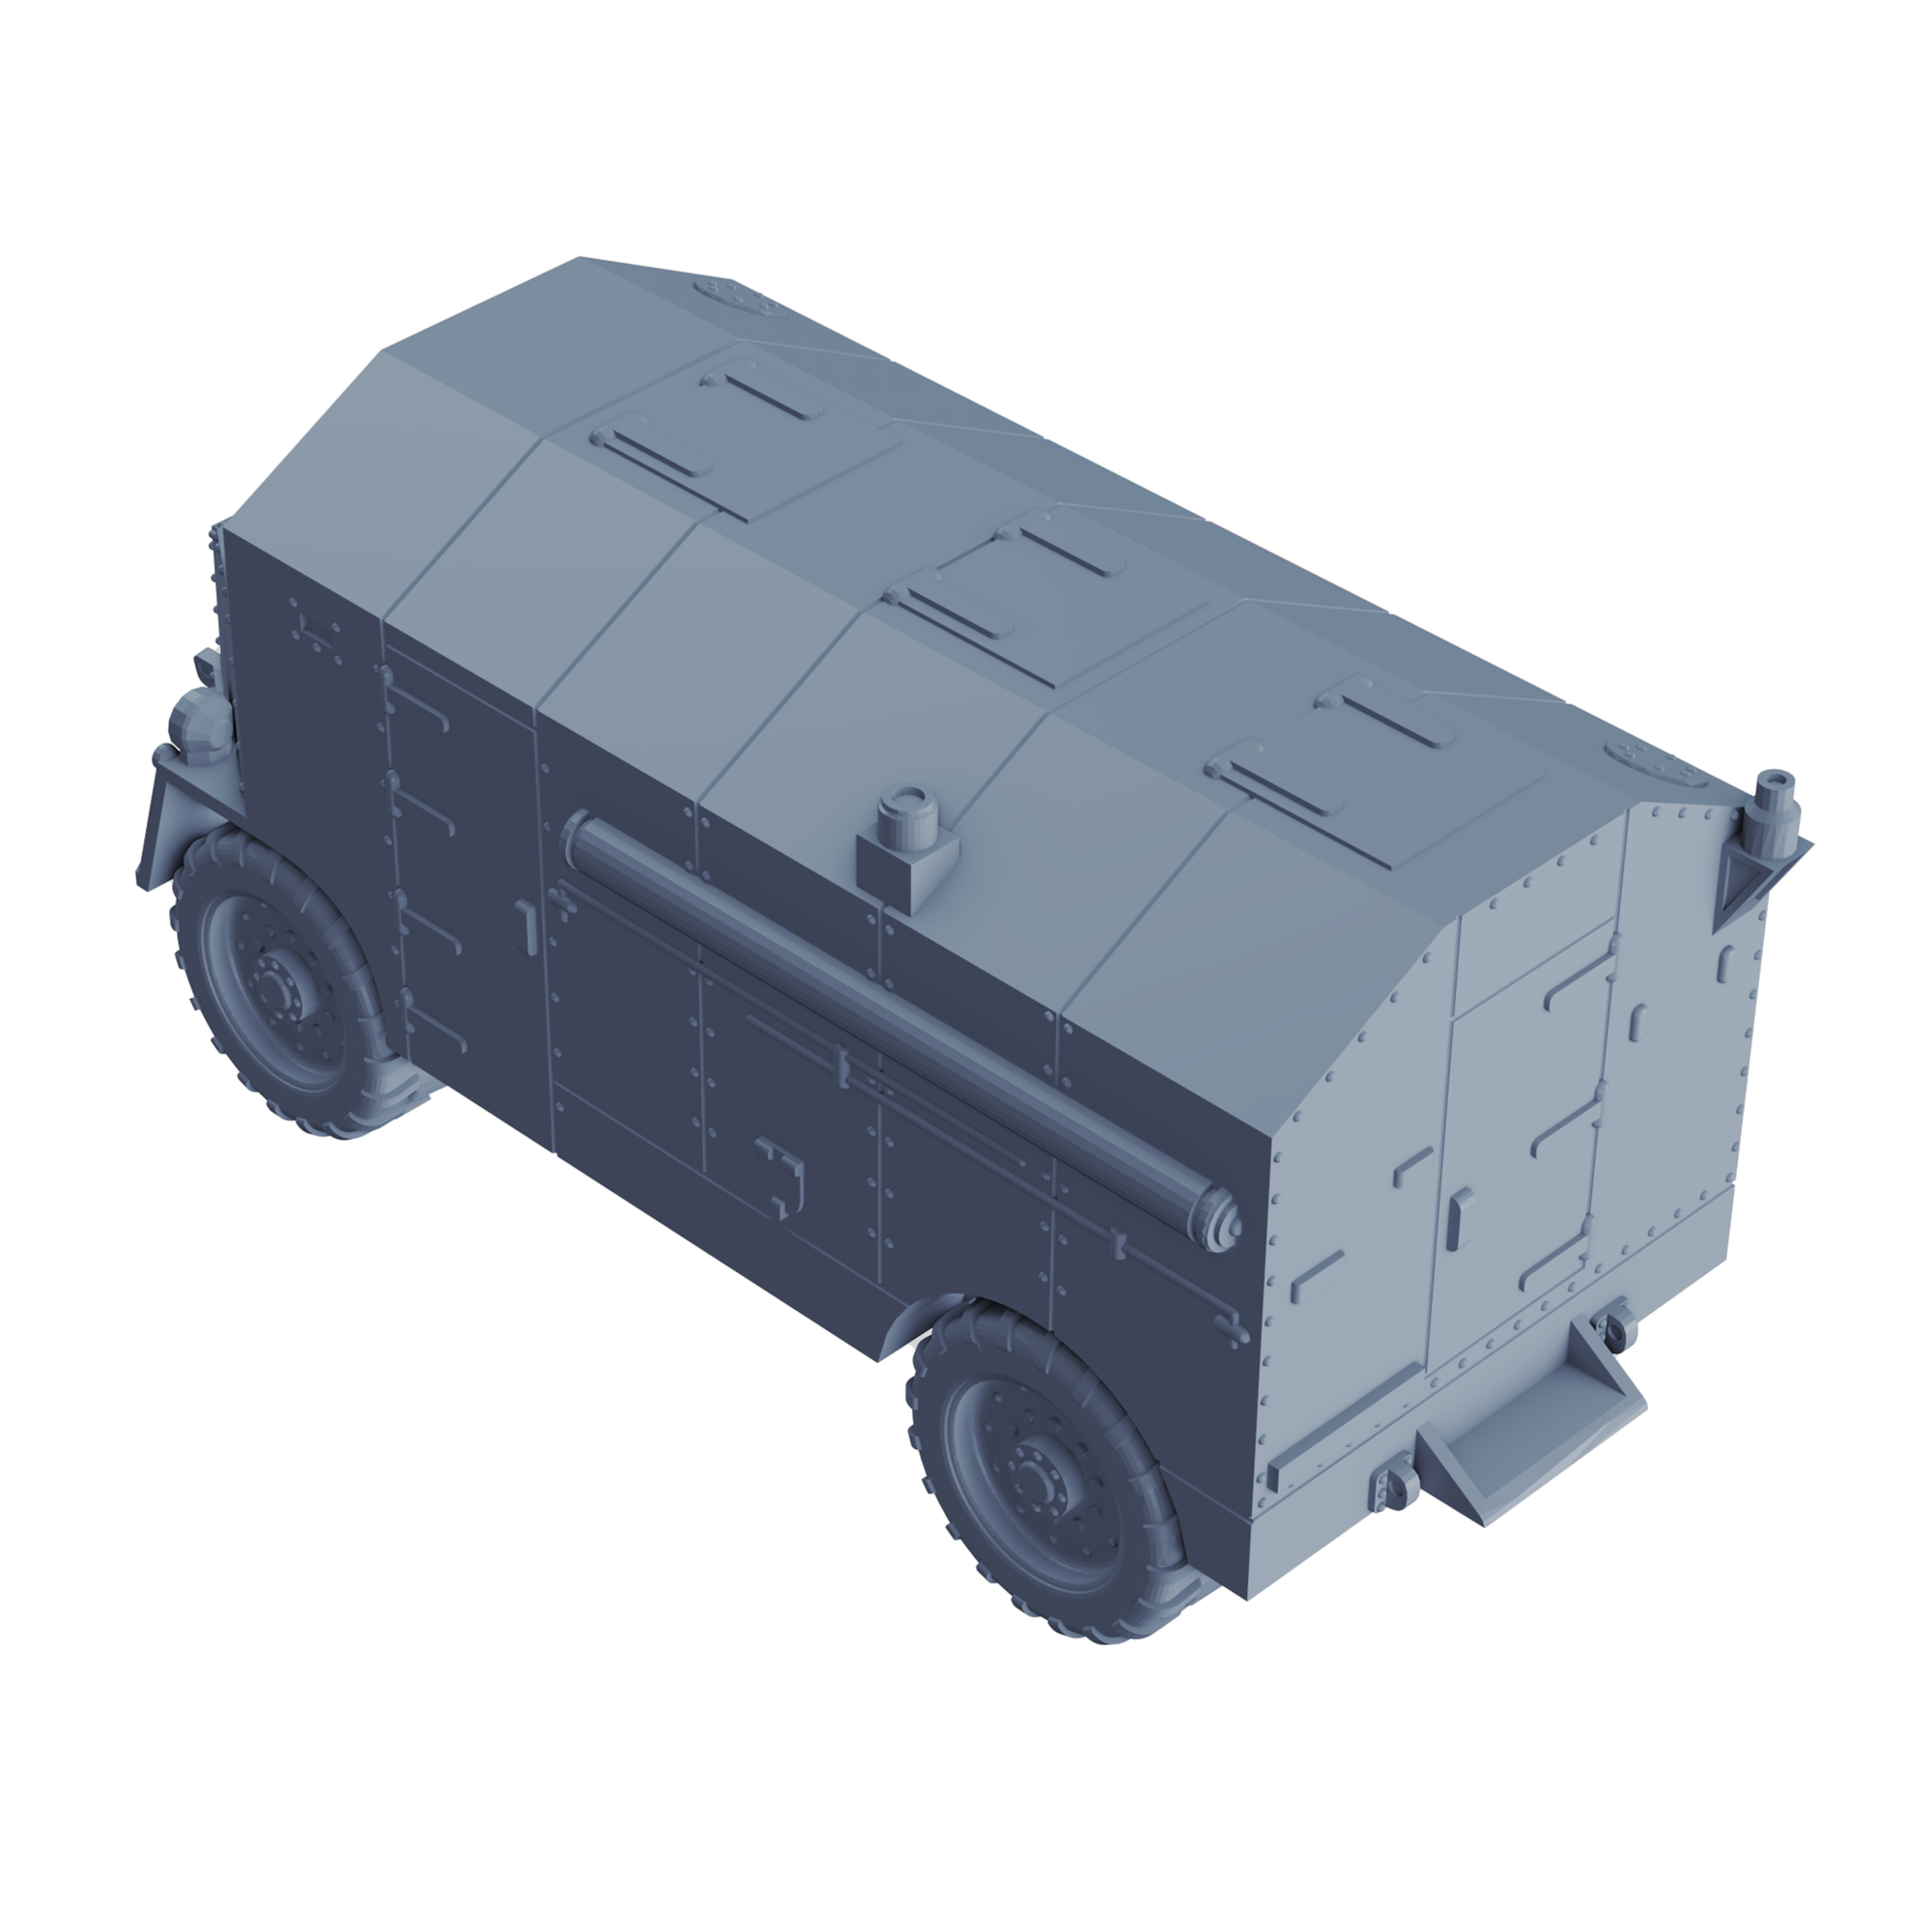 AC Dorchester Armored Command Vehicle